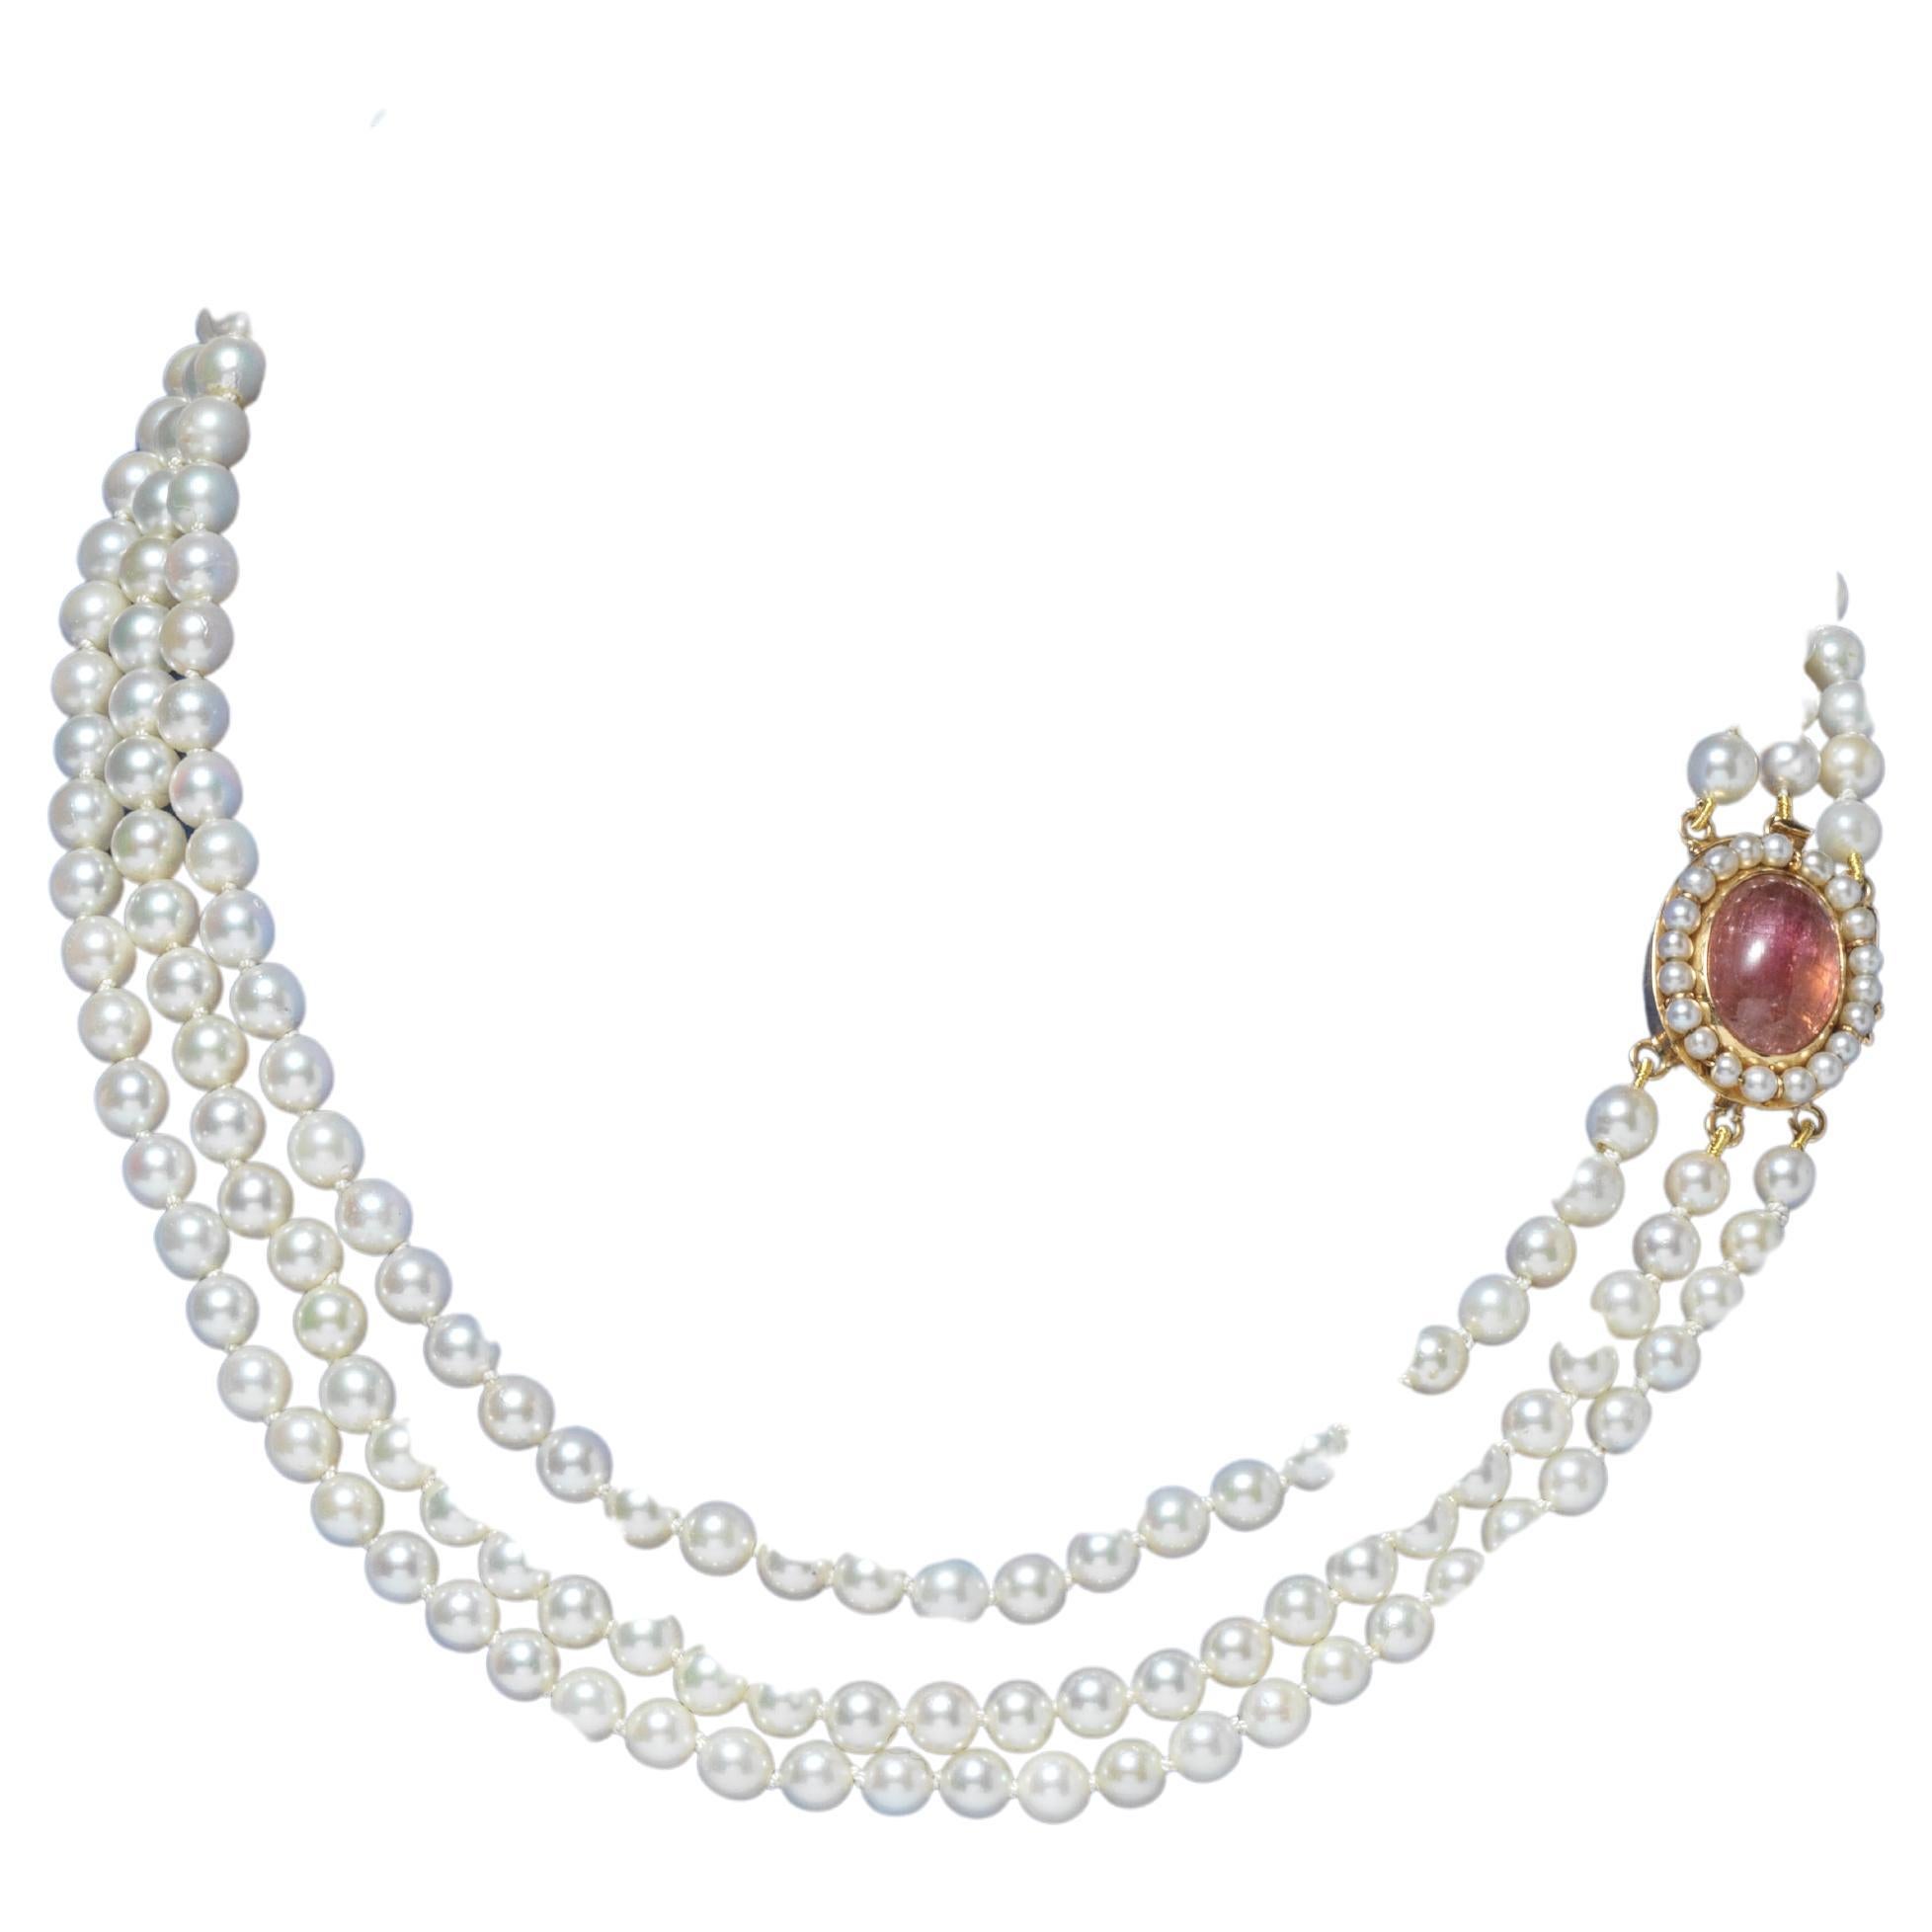 A charming pearl necklace with three rows of pearls that closes together with a 18 k gold lock that has a cabochon cut turmalin in the middle. The lock is made by the Swedish goldsmith K H Augustsson in 1963.

The design of the lock is charming and